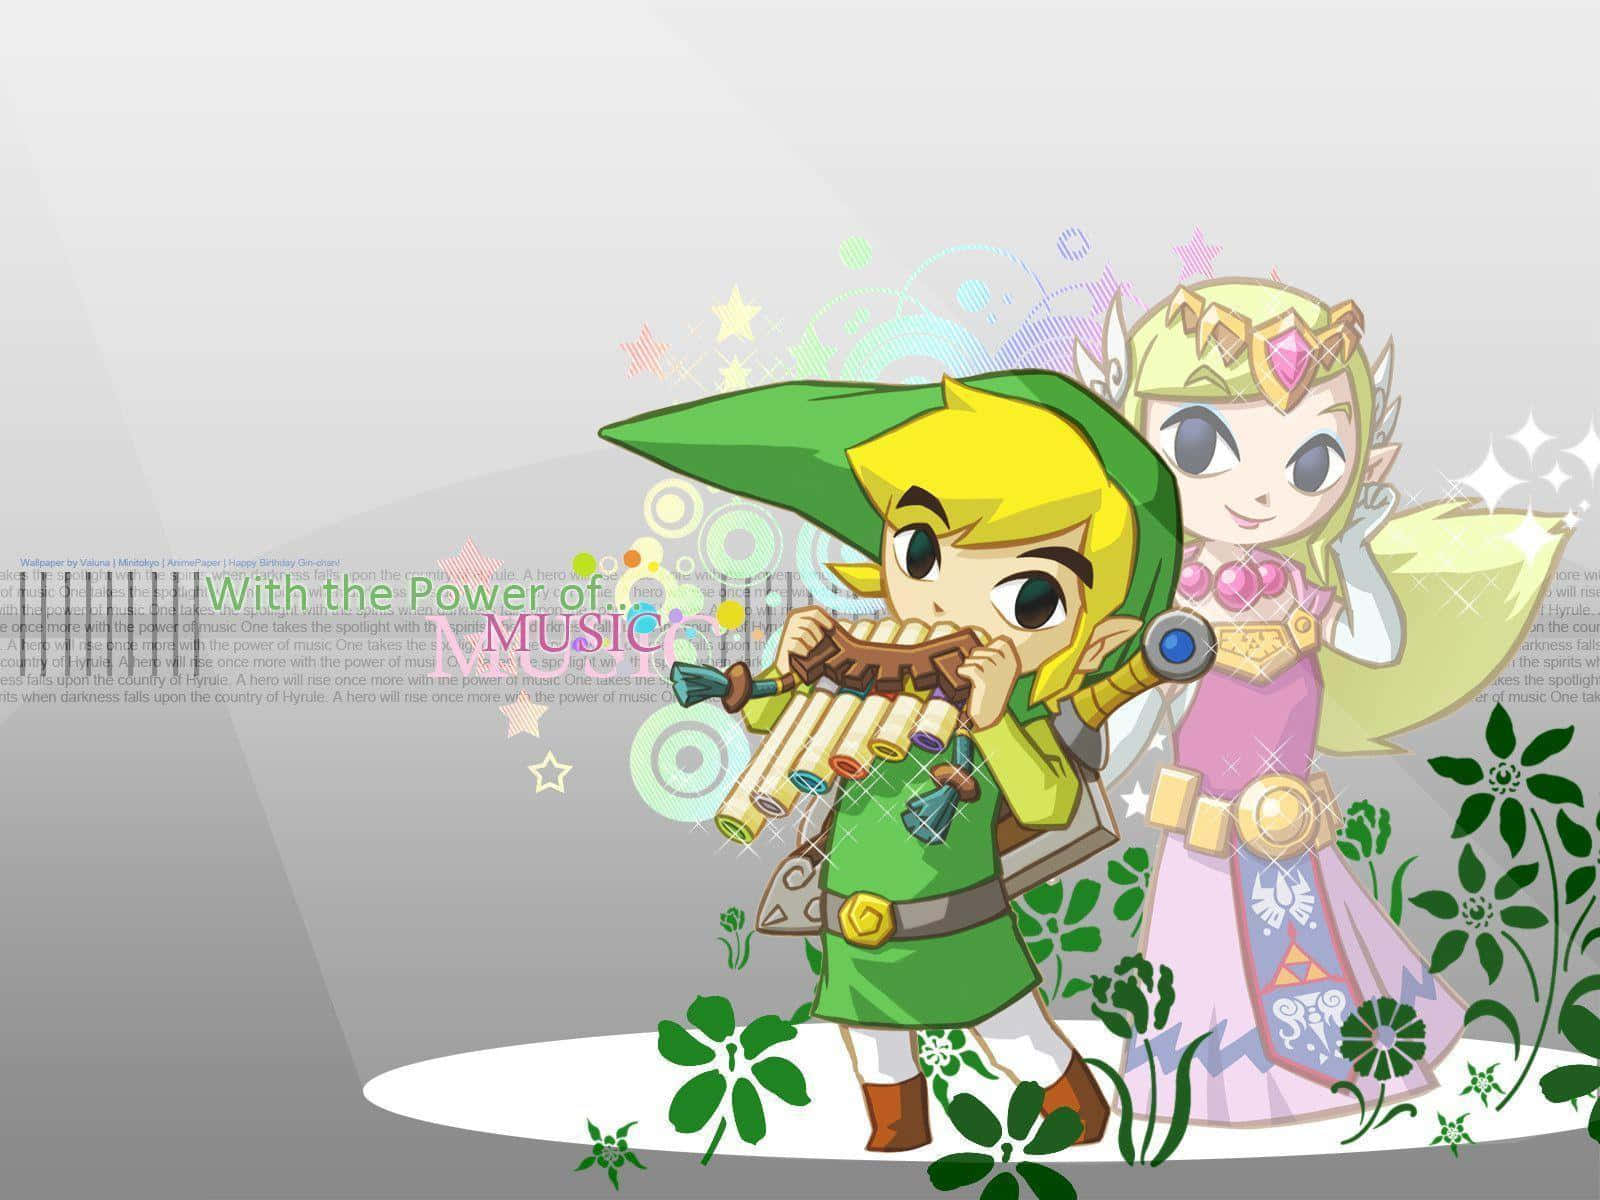 Take A Journey Through A Mysterious World With Toon Link! Wallpaper